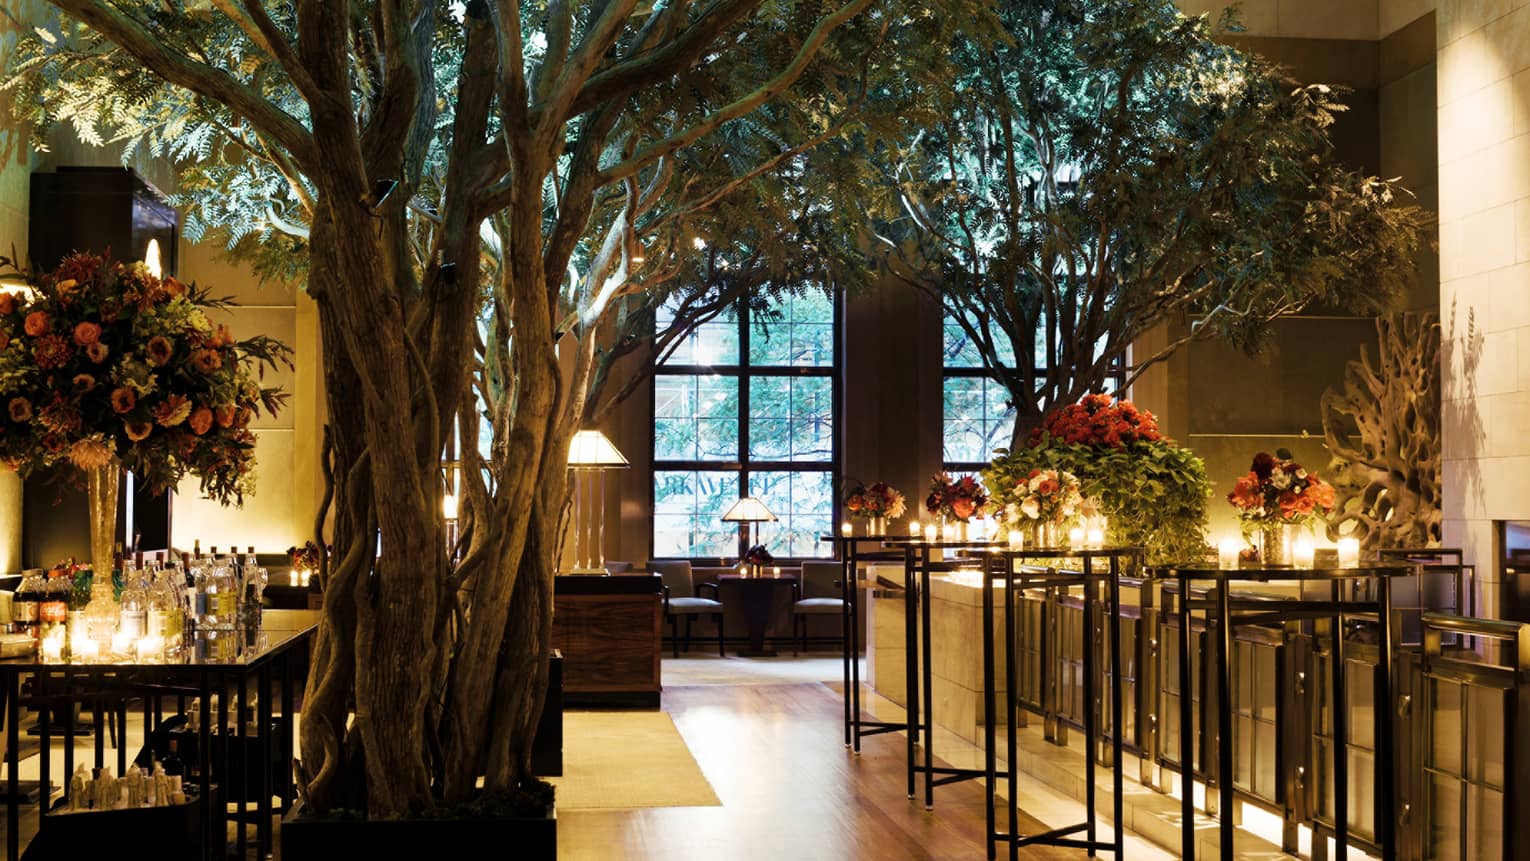 Dark lounge with candles on cocktail table, potted indoor trees